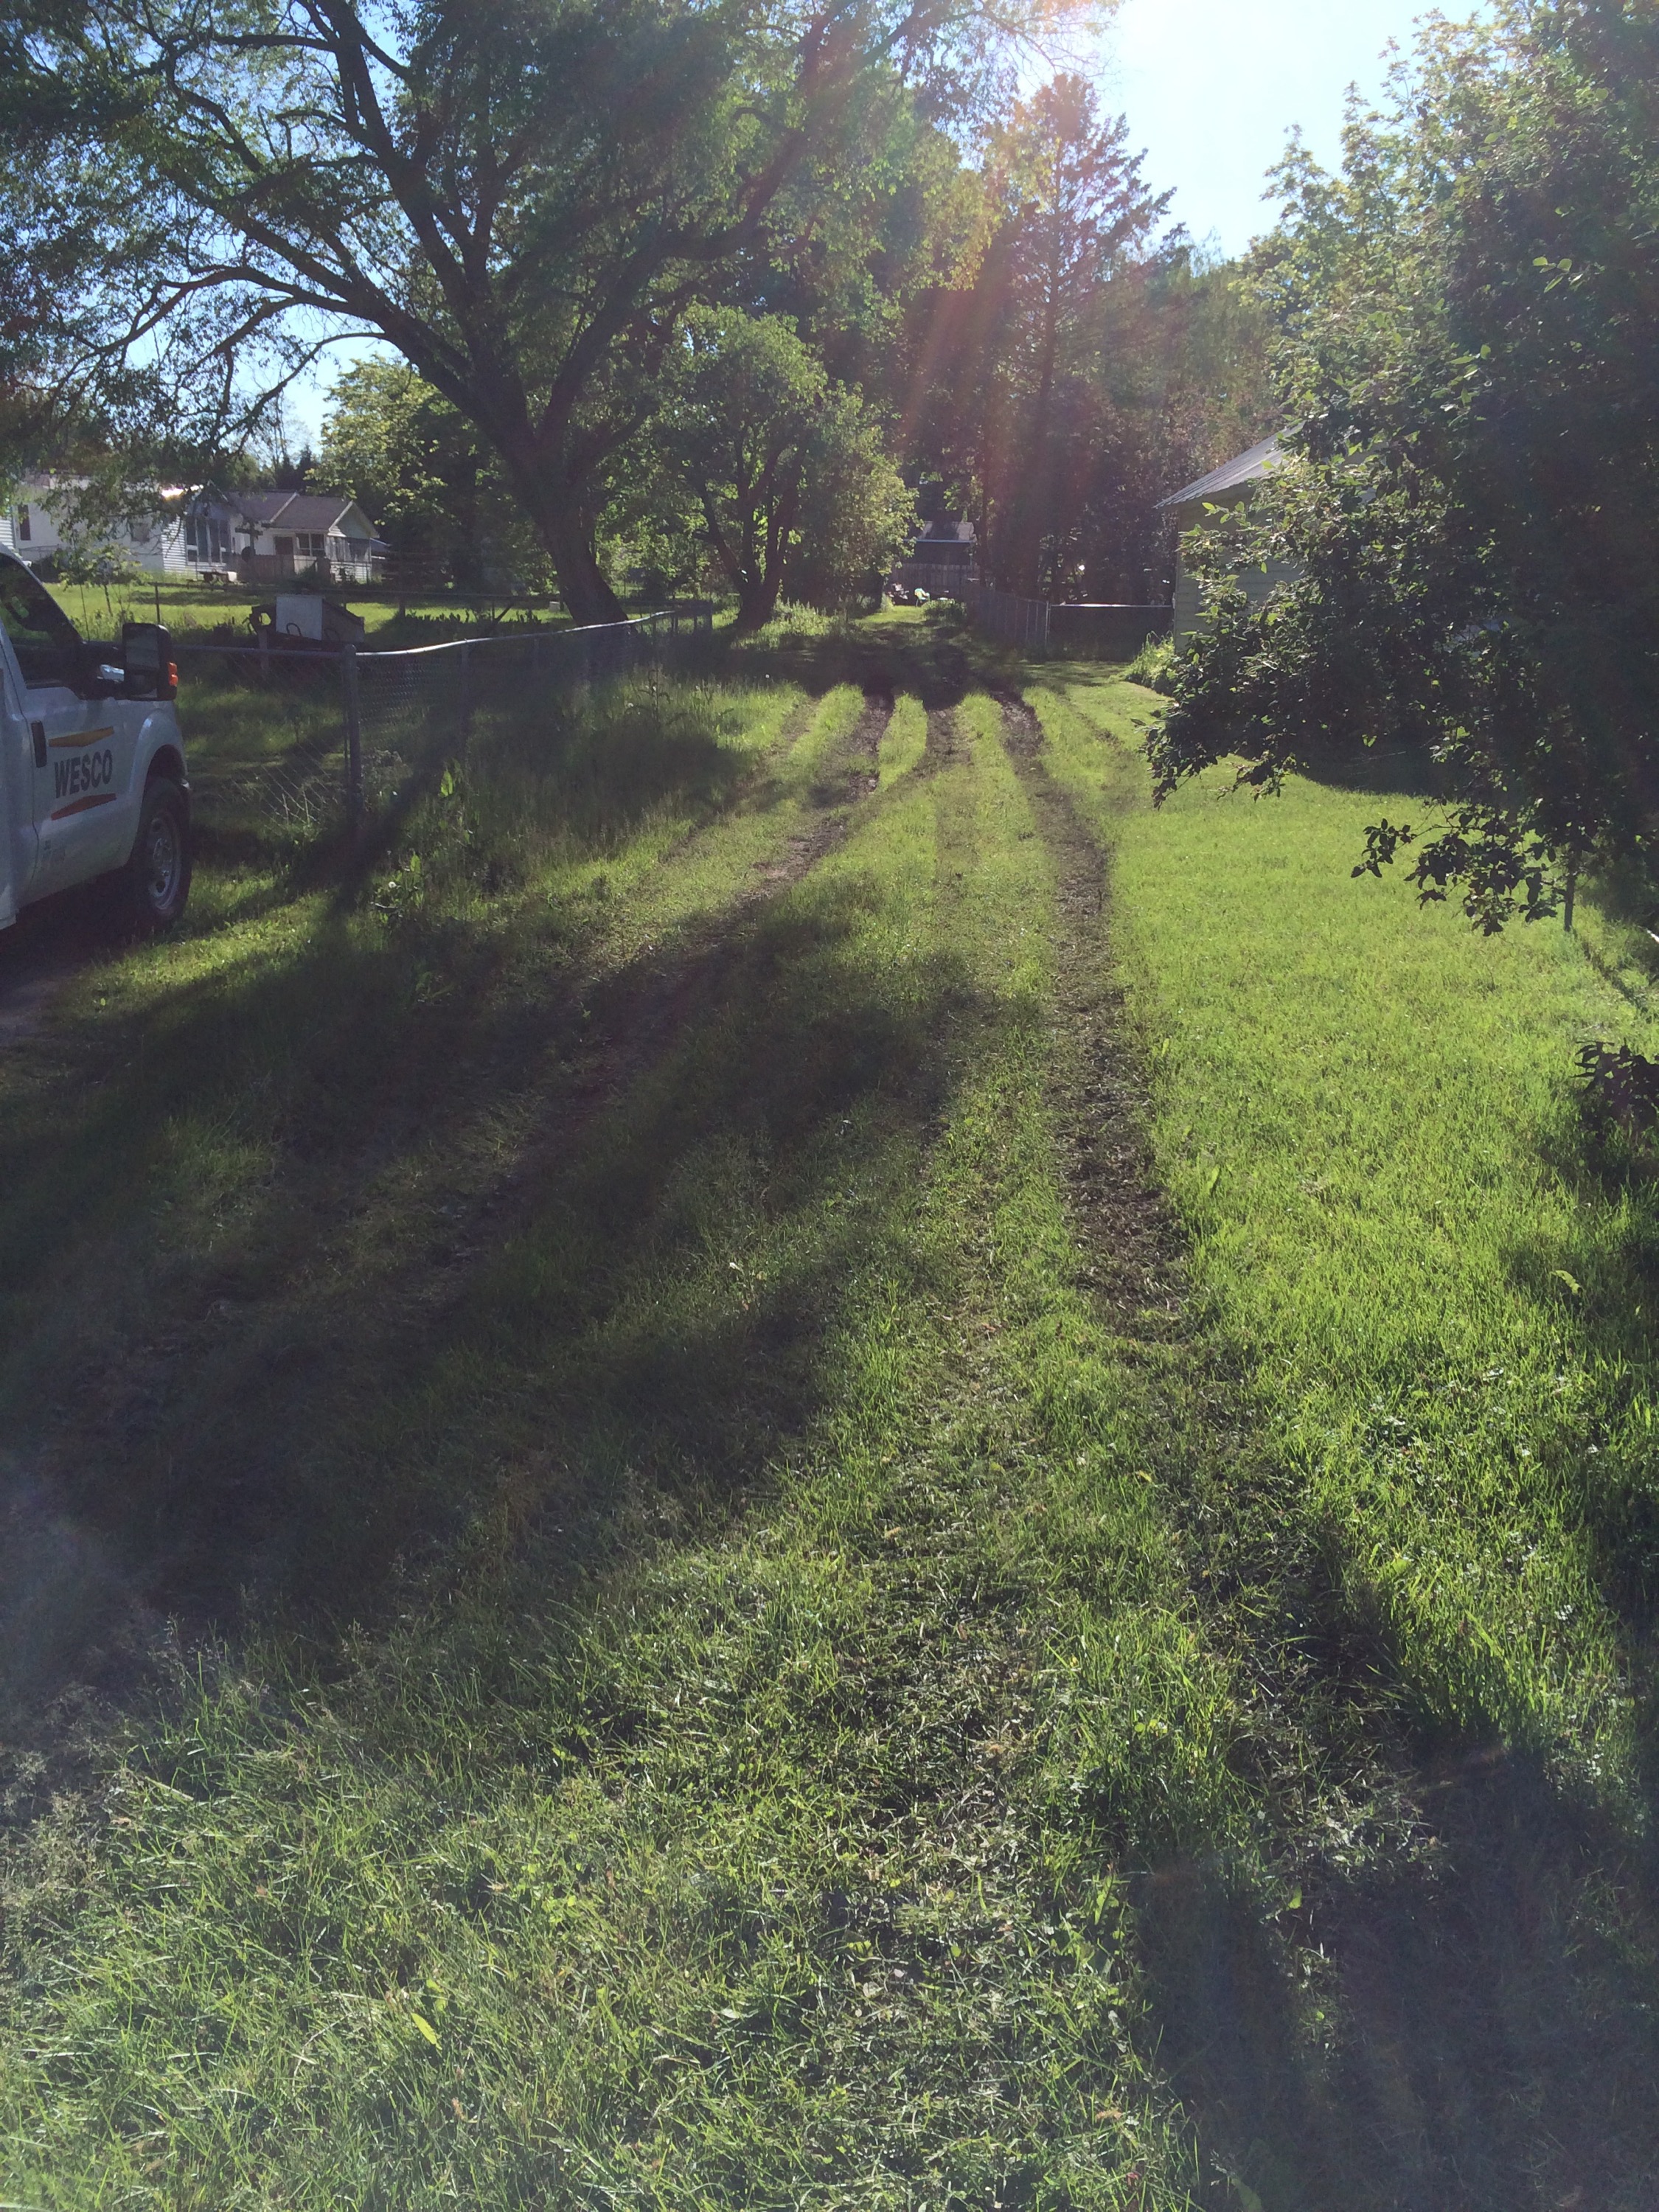 Scottville residents concerned about neighbor’s use of alley.